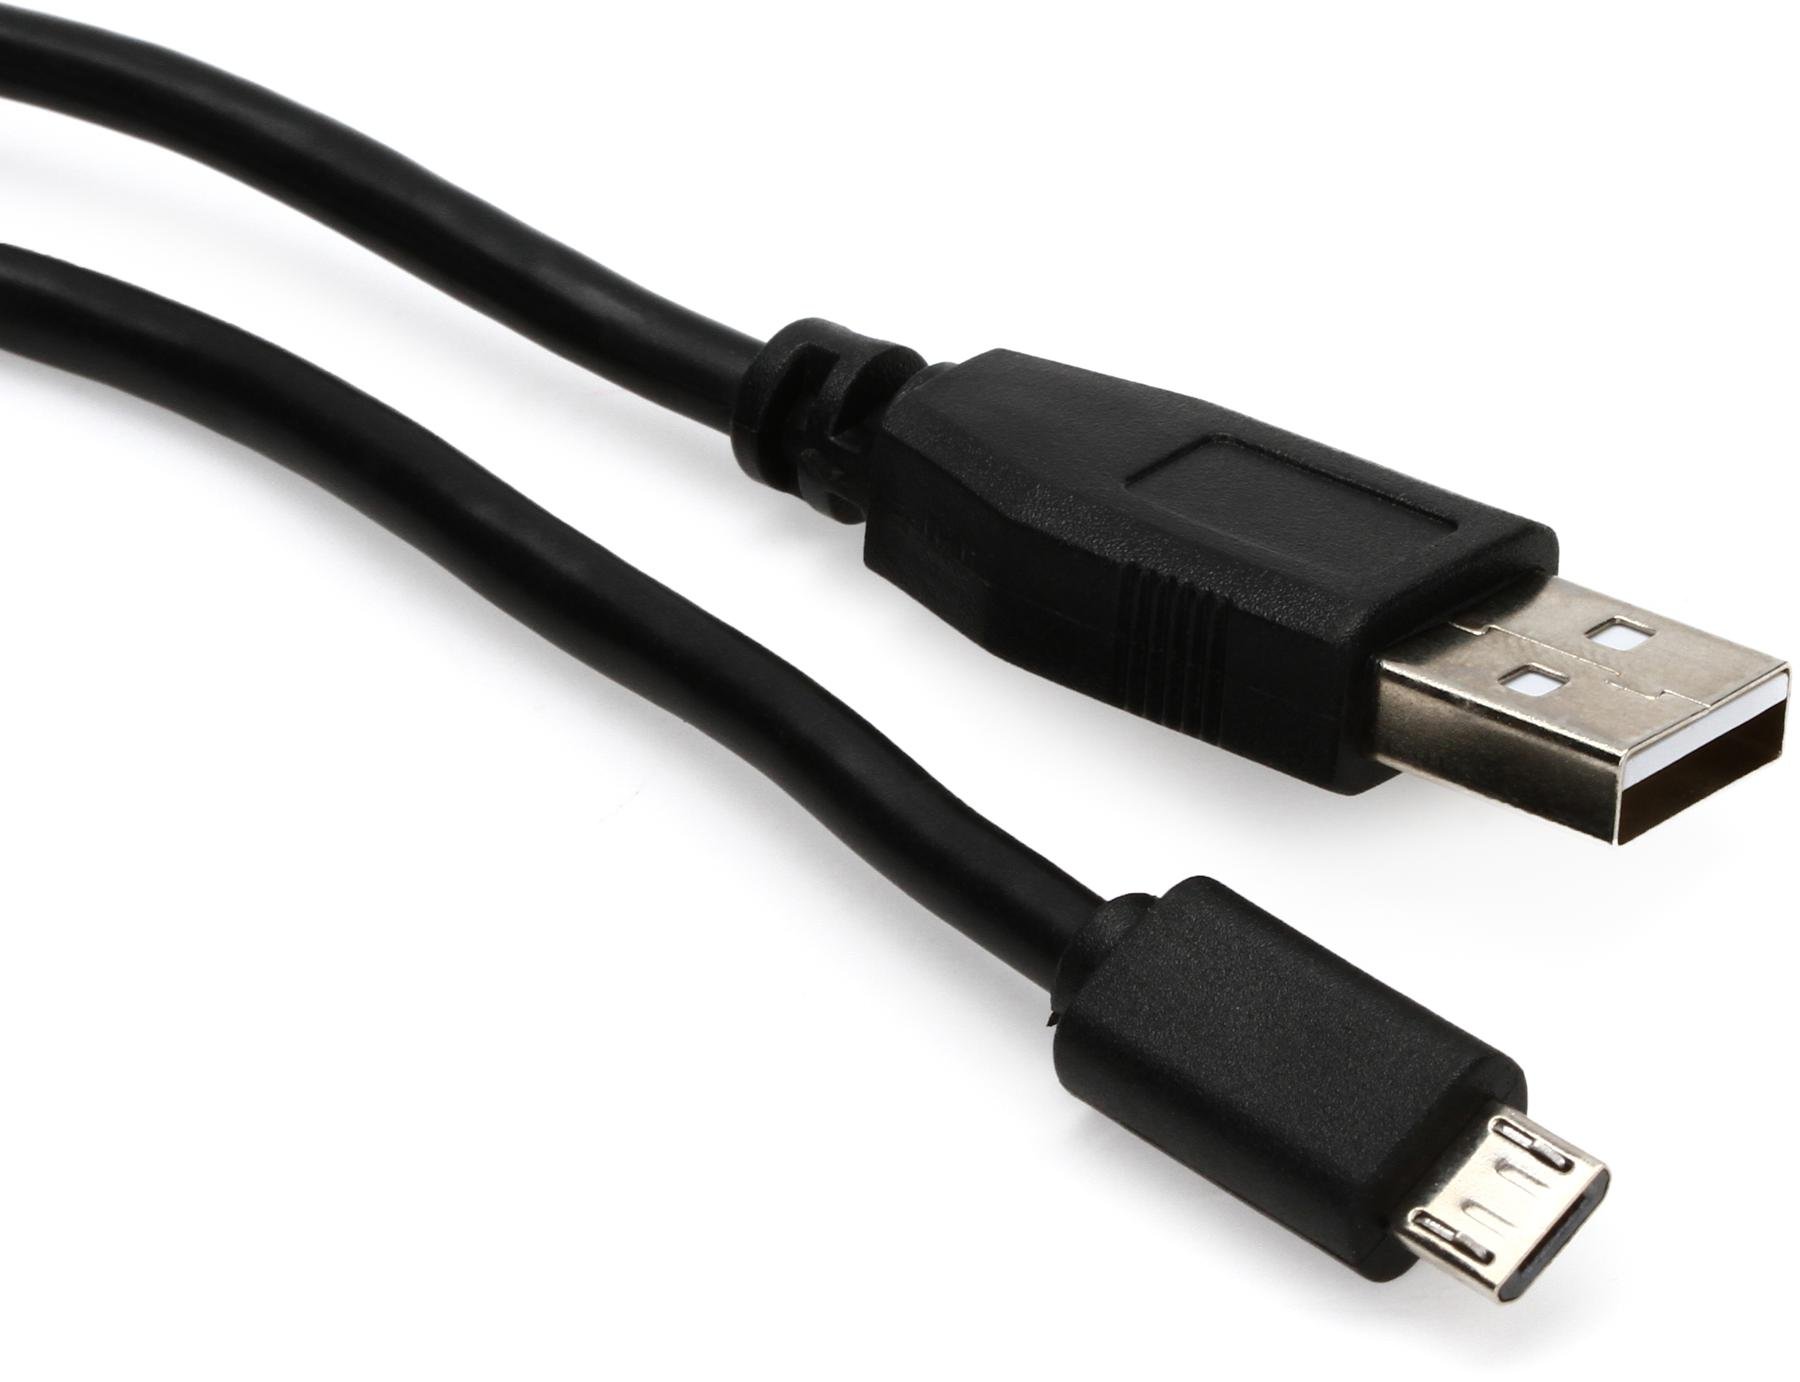 high speed usb cable